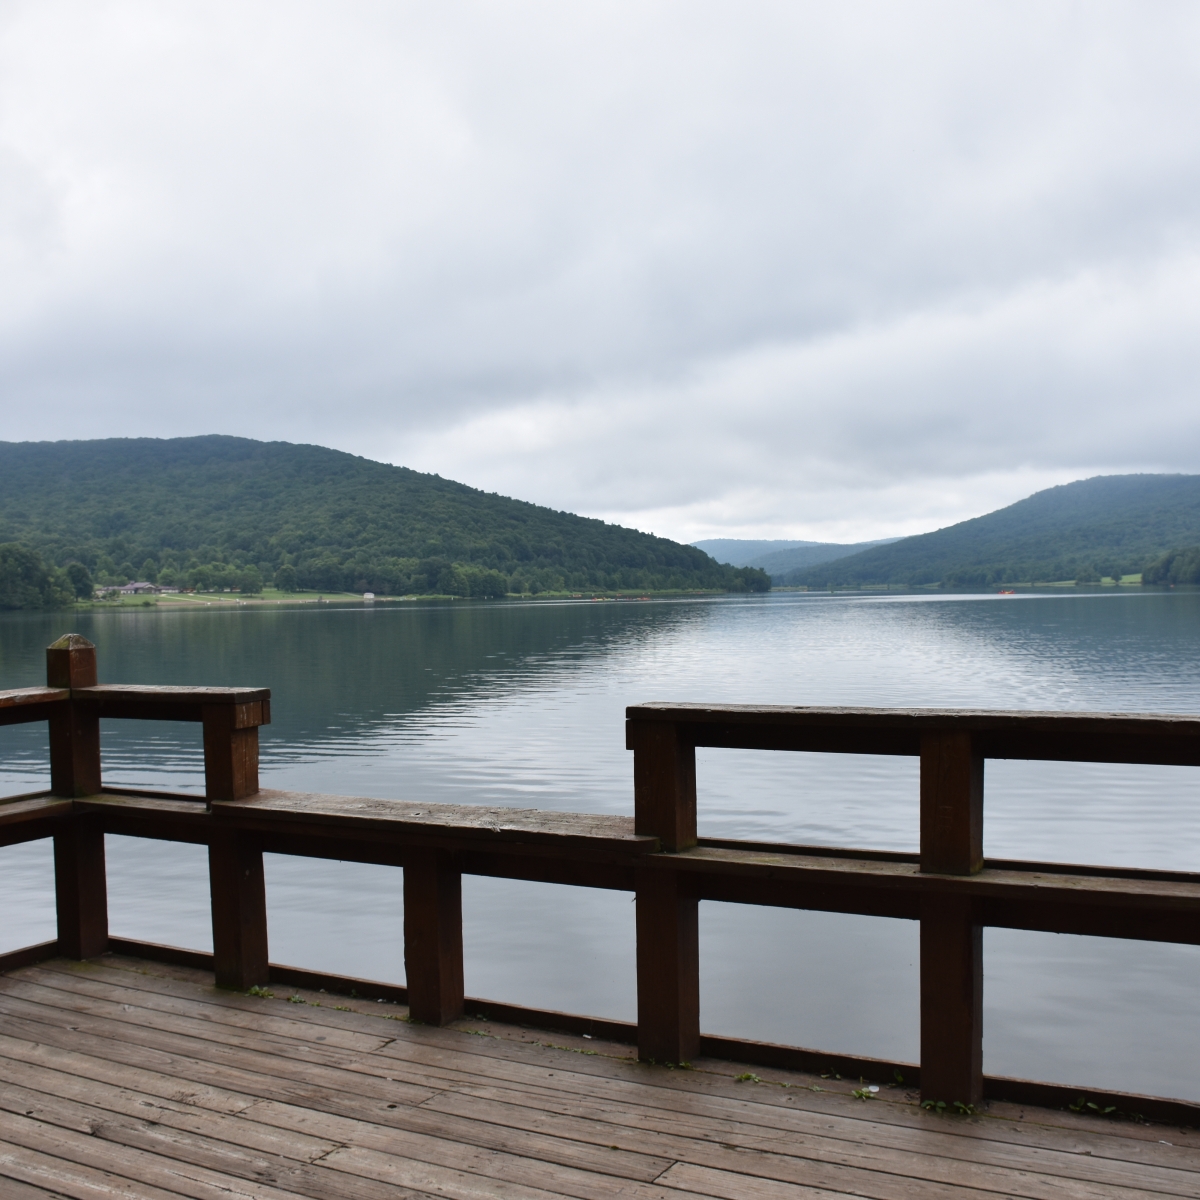 View from fishing dock on Quaker Lake at Allegany State Park